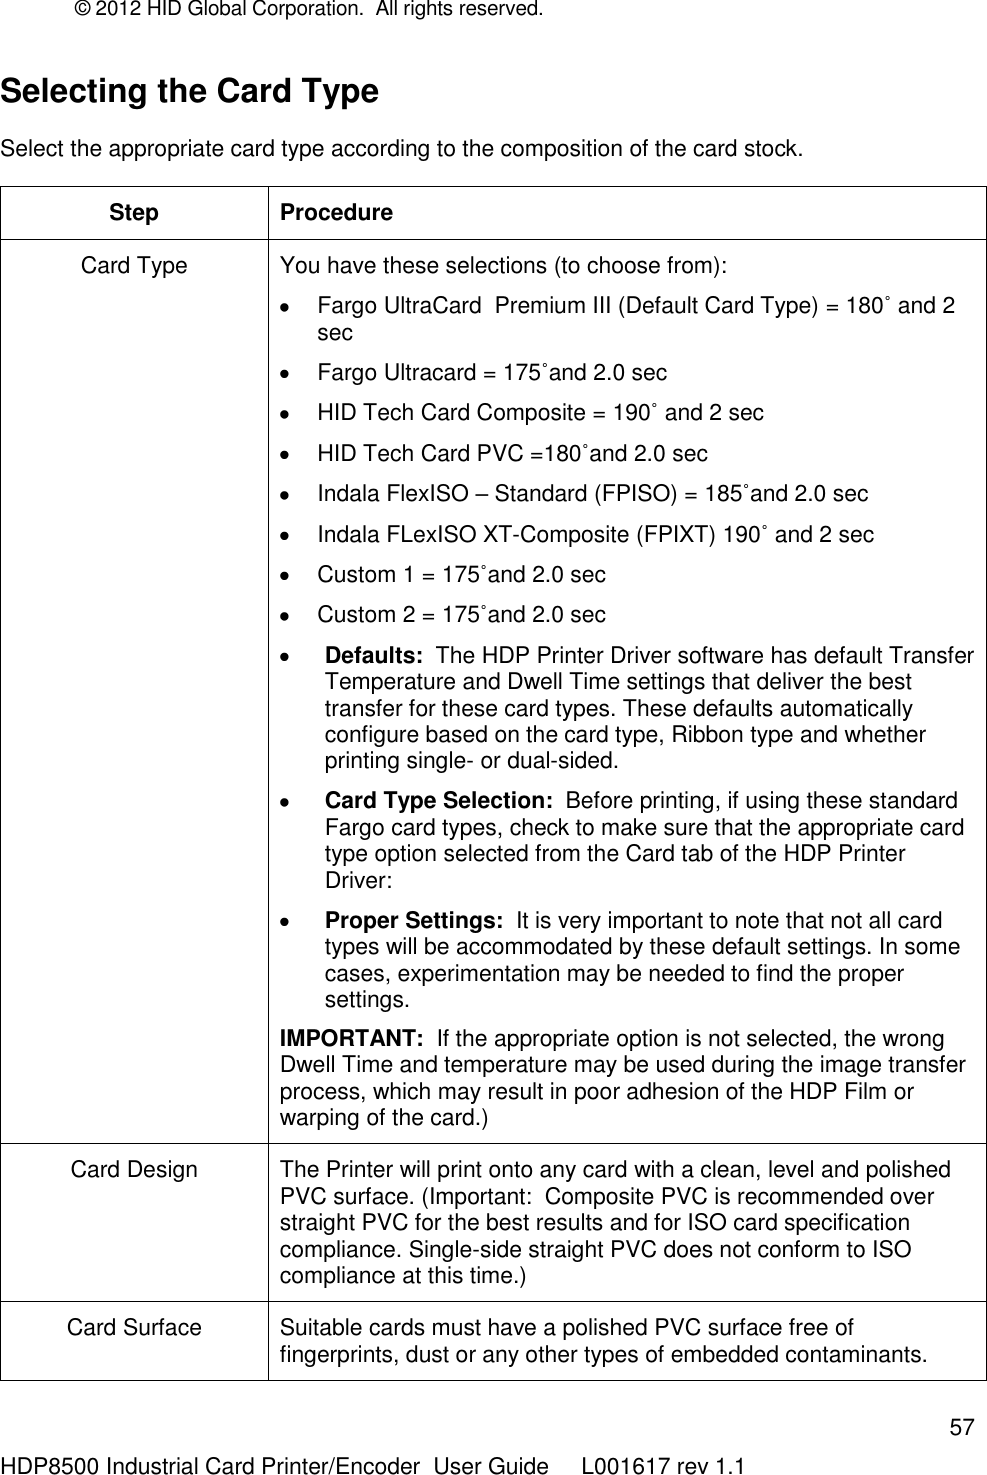 © 2012 HID Global Corporation.  All rights reserved.  57 HDP8500 Industrial Card Printer/Encoder  User Guide     L001617 rev 1.1 Selecting the Card Type Select the appropriate card type according to the composition of the card stock. Step Procedure Card Type You have these selections (to choose from):   Fargo UltraCard  Premium III (Default Card Type) = 180˚ and 2 sec   Fargo Ultracard = 175˚and 2.0 sec   HID Tech Card Composite = 190˚ and 2 sec   HID Tech Card PVC =180˚and 2.0 sec   Indala FlexISO – Standard (FPISO) = 185˚and 2.0 sec   Indala FLexISO XT-Composite (FPIXT) 190˚ and 2 sec   Custom 1 = 175˚and 2.0 sec   Custom 2 = 175˚and 2.0 sec  Defaults:  The HDP Printer Driver software has default Transfer Temperature and Dwell Time settings that deliver the best transfer for these card types. These defaults automatically configure based on the card type, Ribbon type and whether printing single- or dual-sided.  Card Type Selection:  Before printing, if using these standard Fargo card types, check to make sure that the appropriate card type option selected from the Card tab of the HDP Printer Driver:   Proper Settings:  It is very important to note that not all card types will be accommodated by these default settings. In some cases, experimentation may be needed to find the proper settings.  IMPORTANT:  If the appropriate option is not selected, the wrong Dwell Time and temperature may be used during the image transfer process, which may result in poor adhesion of the HDP Film or warping of the card.)  Card Design The Printer will print onto any card with a clean, level and polished PVC surface. (Important:  Composite PVC is recommended over straight PVC for the best results and for ISO card specification compliance. Single-side straight PVC does not conform to ISO compliance at this time.) Card Surface Suitable cards must have a polished PVC surface free of fingerprints, dust or any other types of embedded contaminants.  